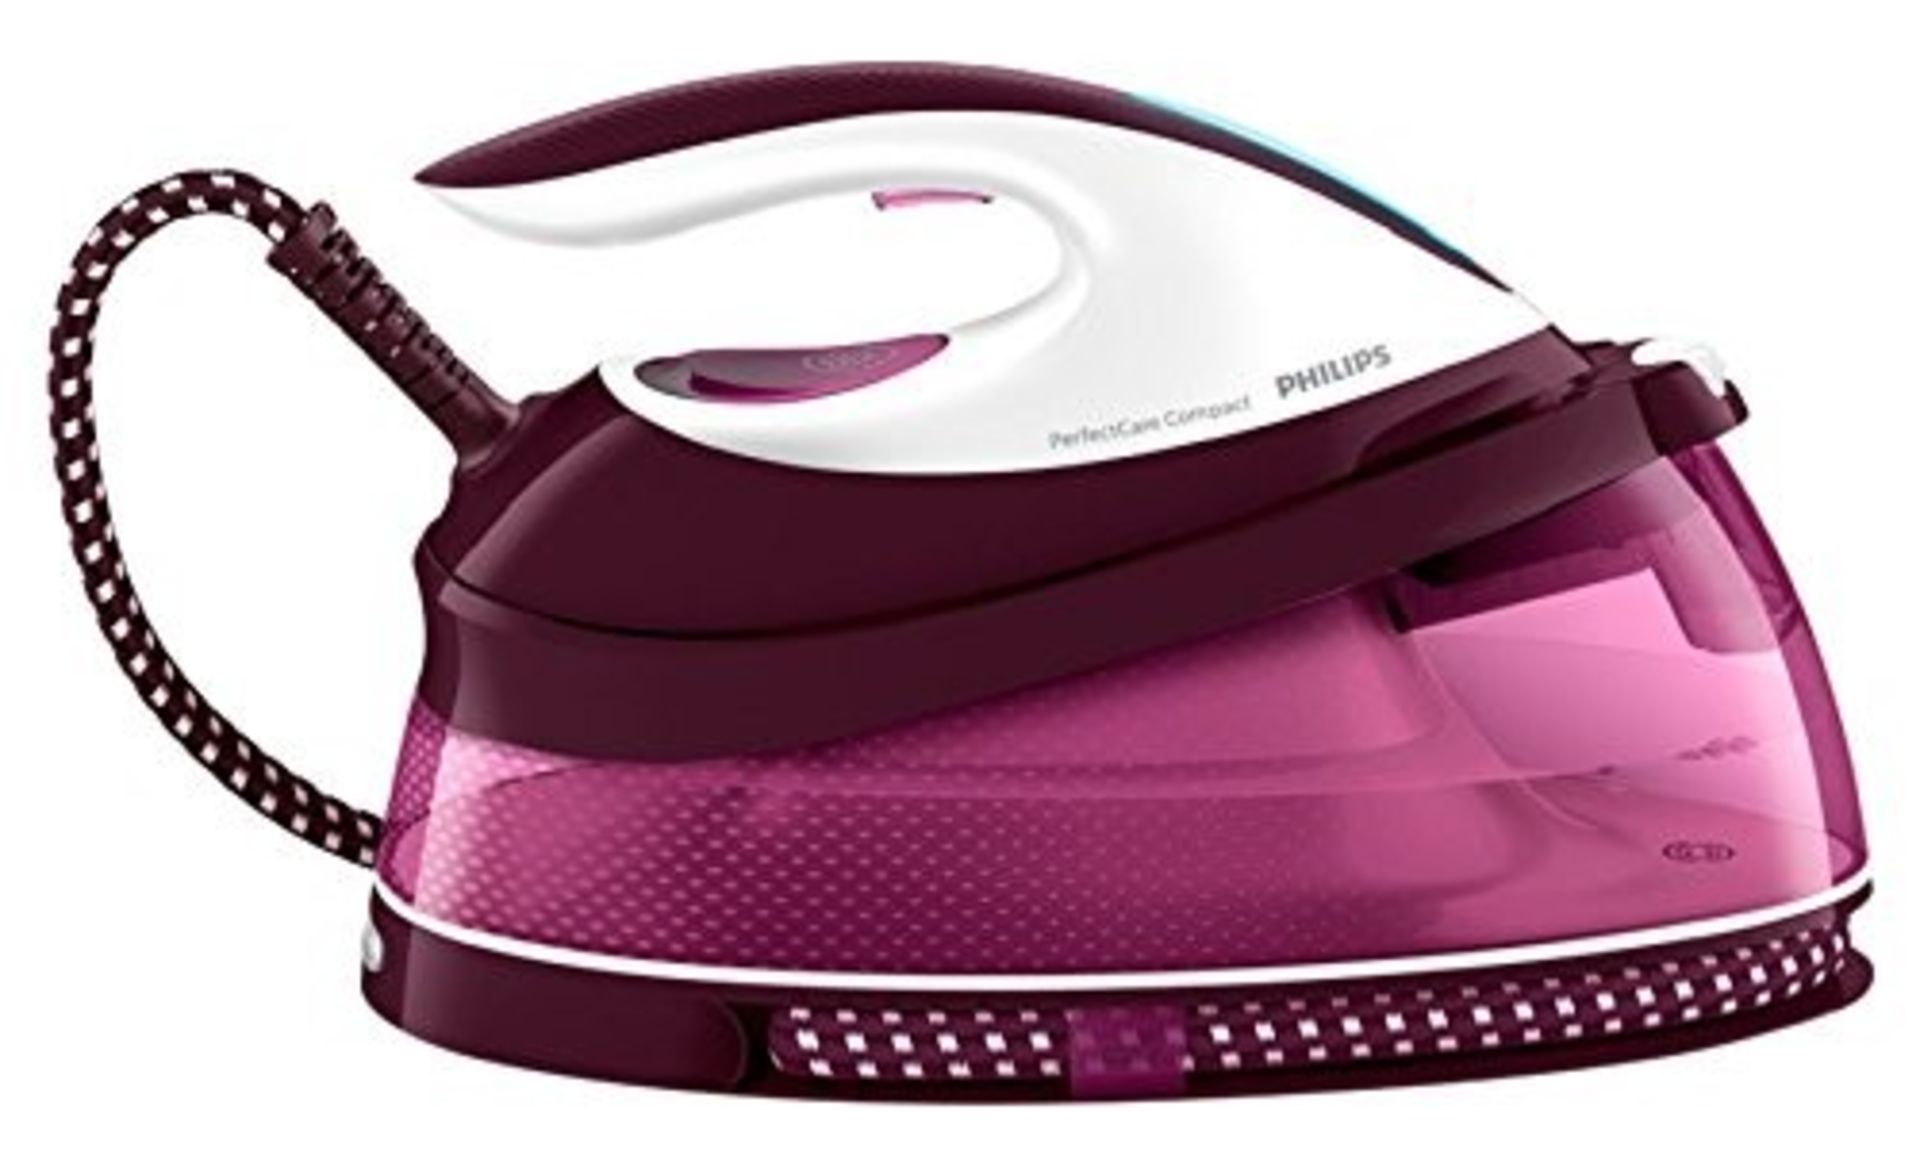 RRP £165.00 PerfectCare Compact Steam Generator Iron GC7808/40 with 280g steam boost